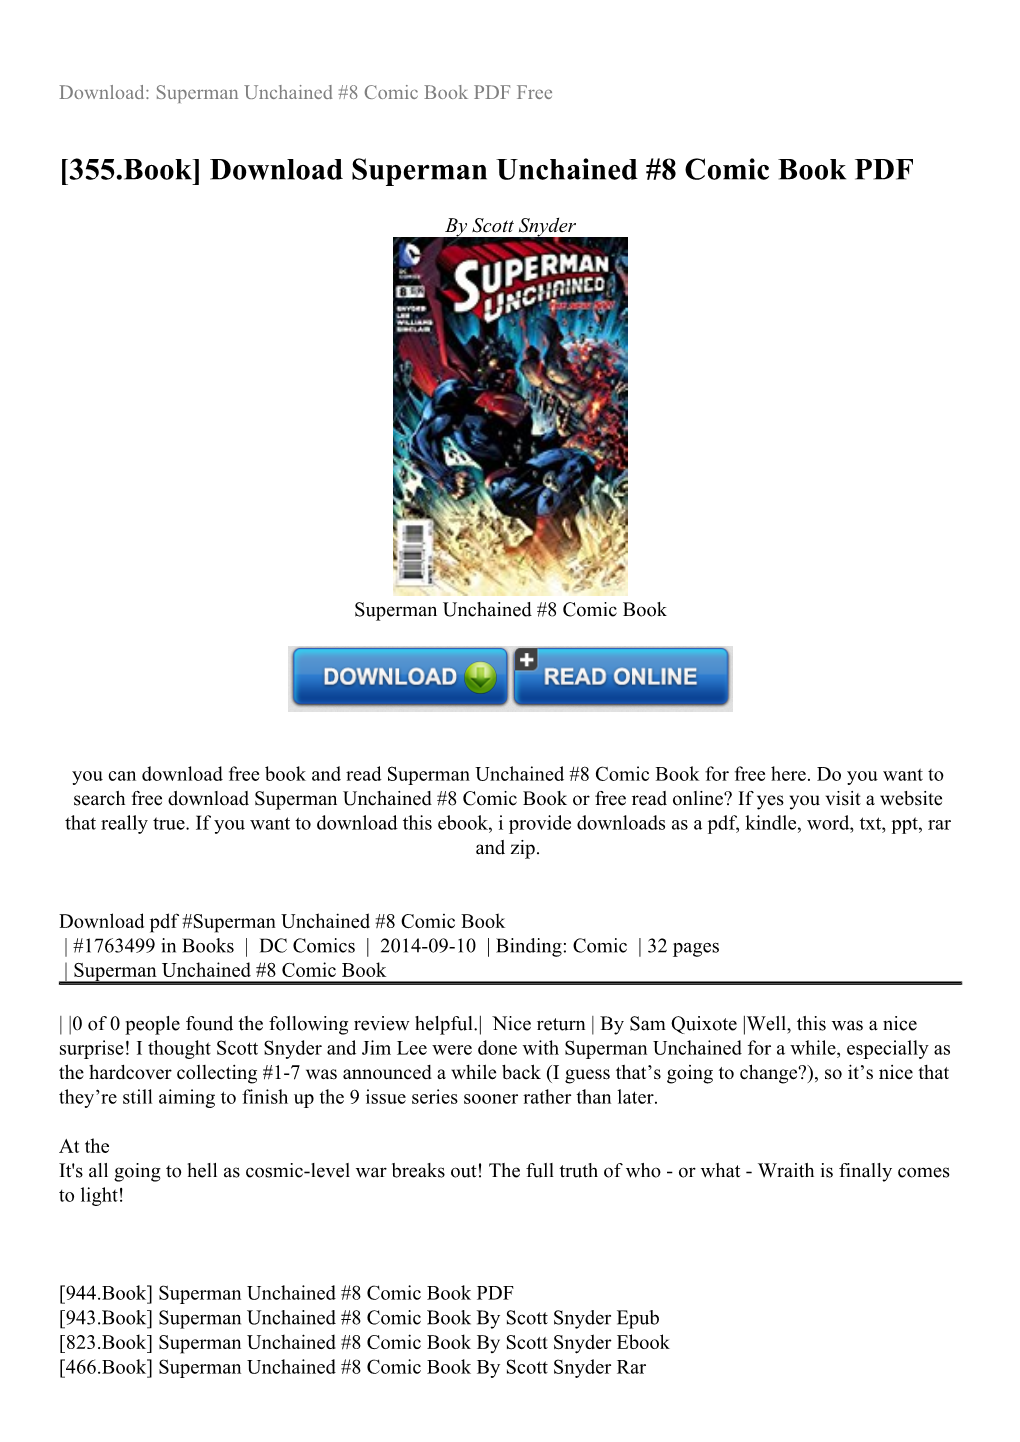 Download Superman Unchained #8 Comic Book PDF